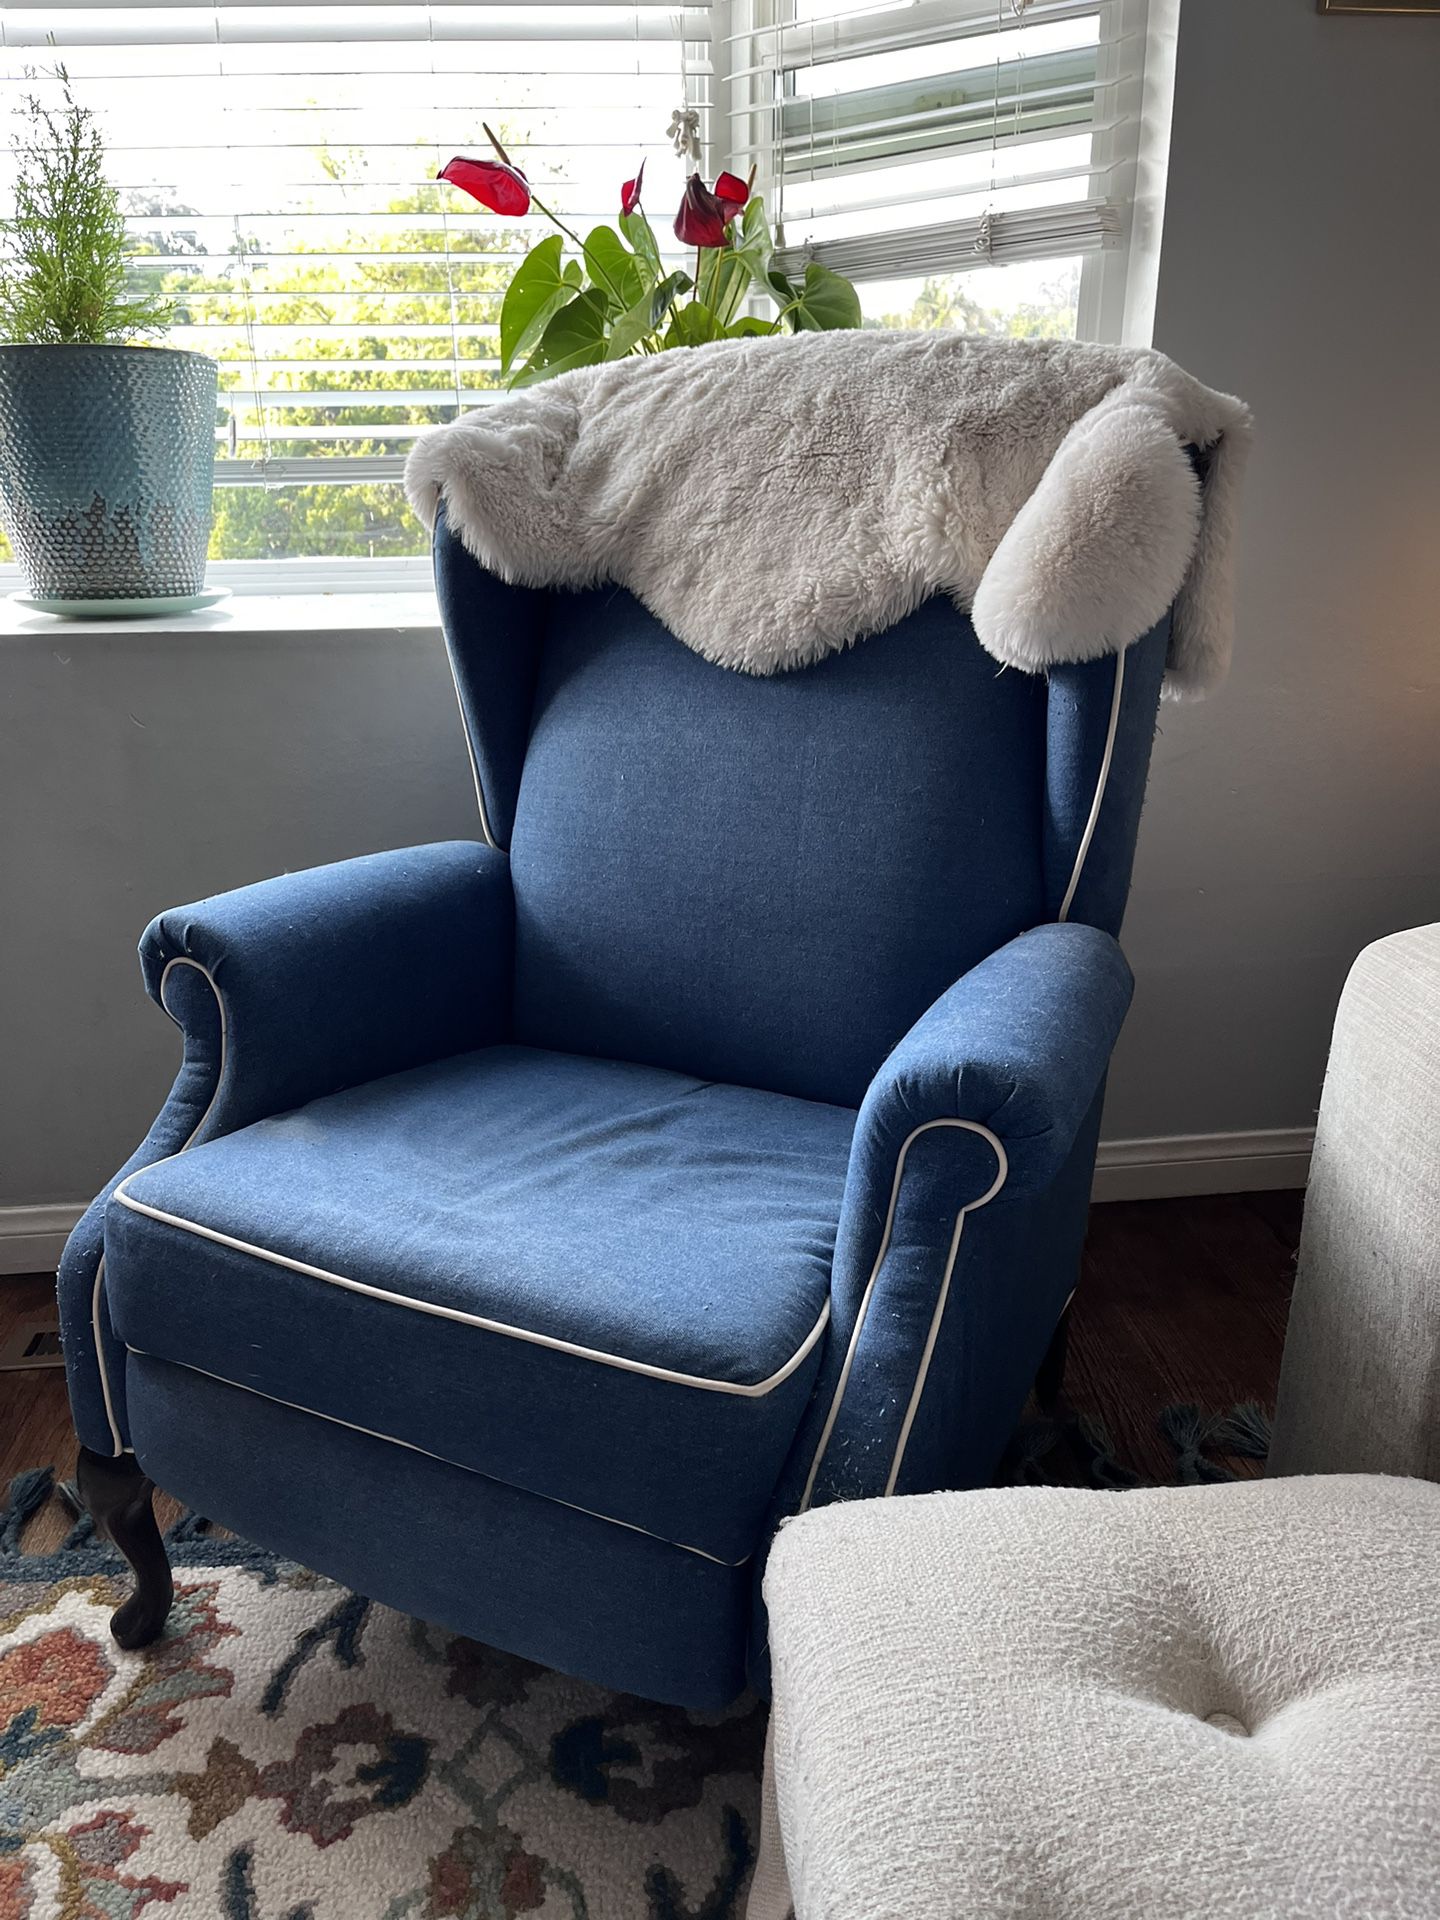 Custom Upholstered Wingback Recliner Chairs